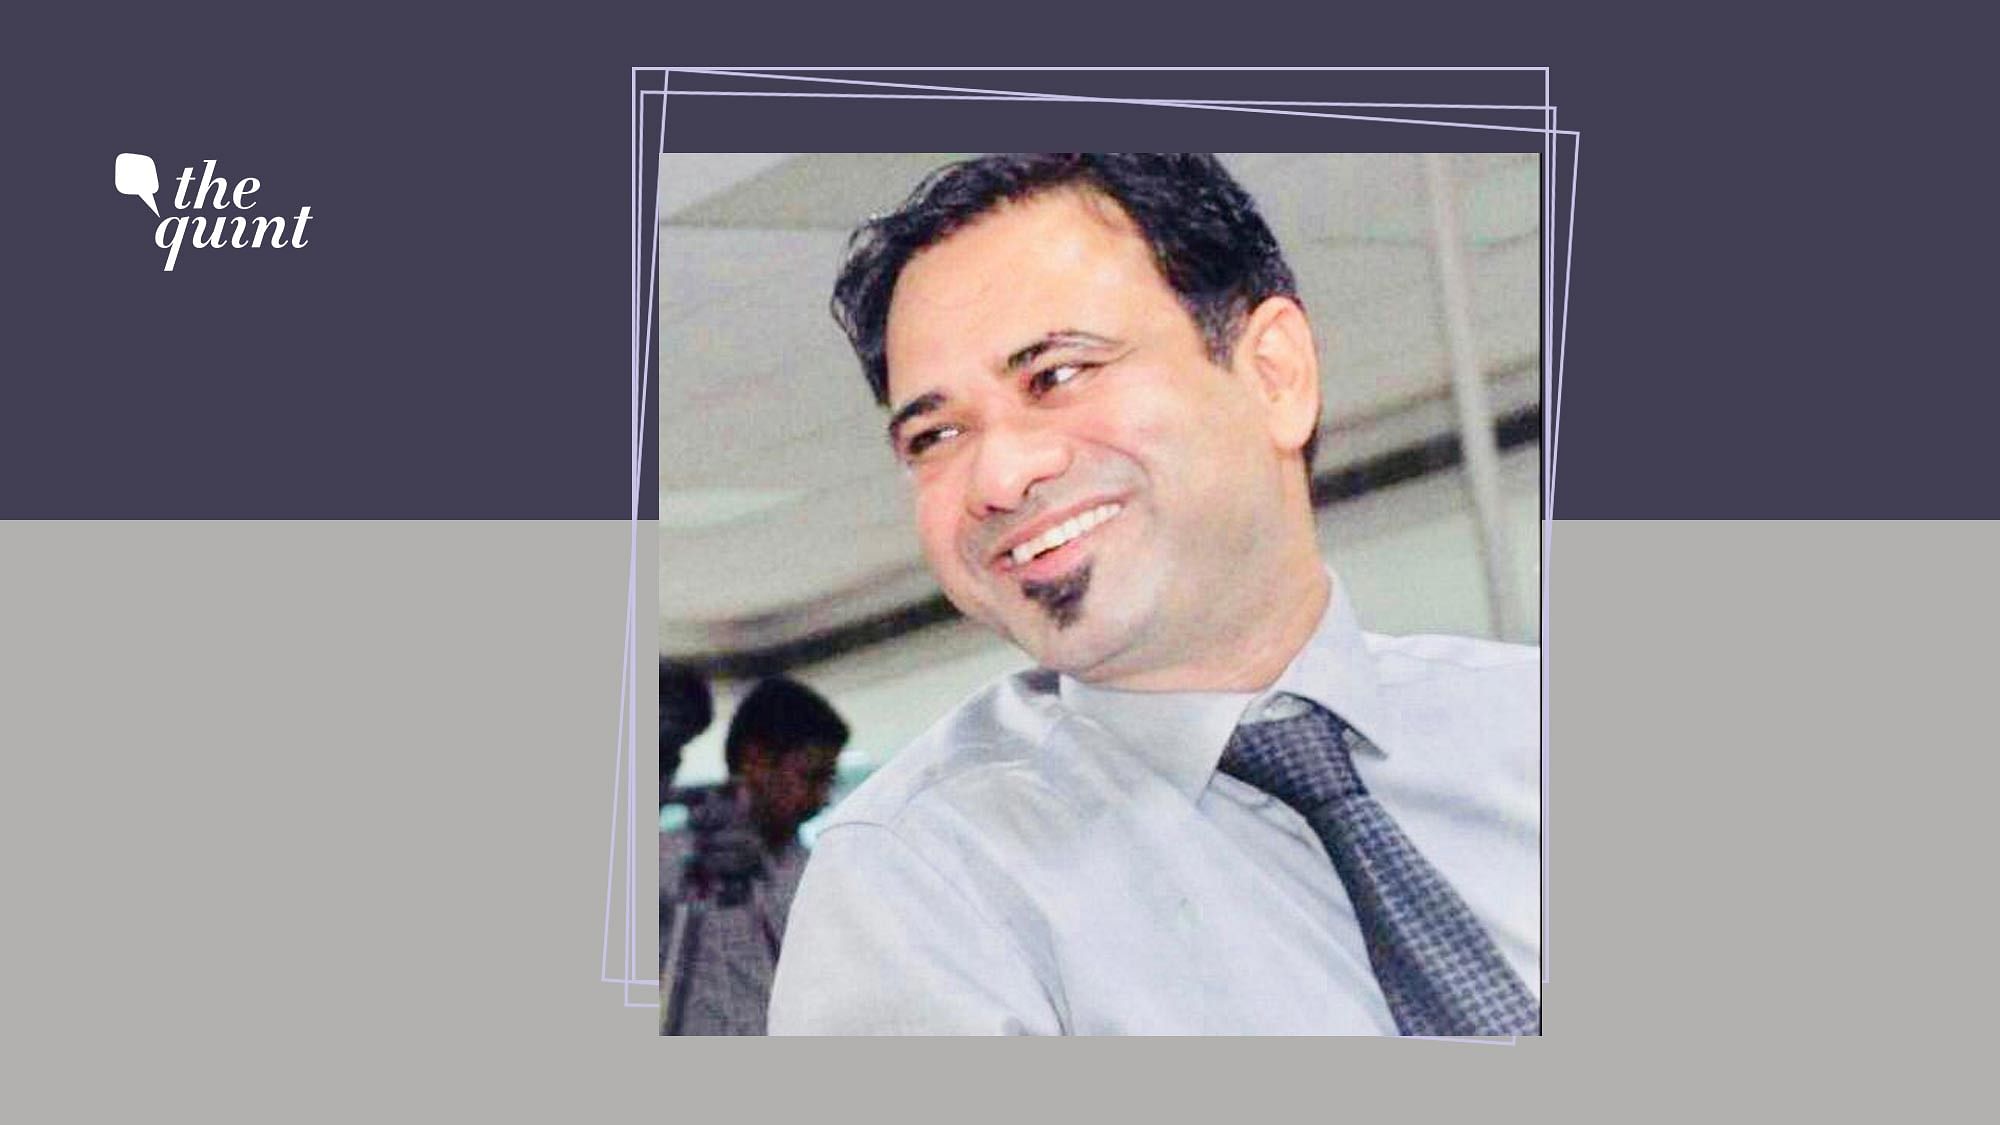 Allahabad High Court cited lack of evidence against Dr Kafeel Khan, and dropped the NSA charges against him.